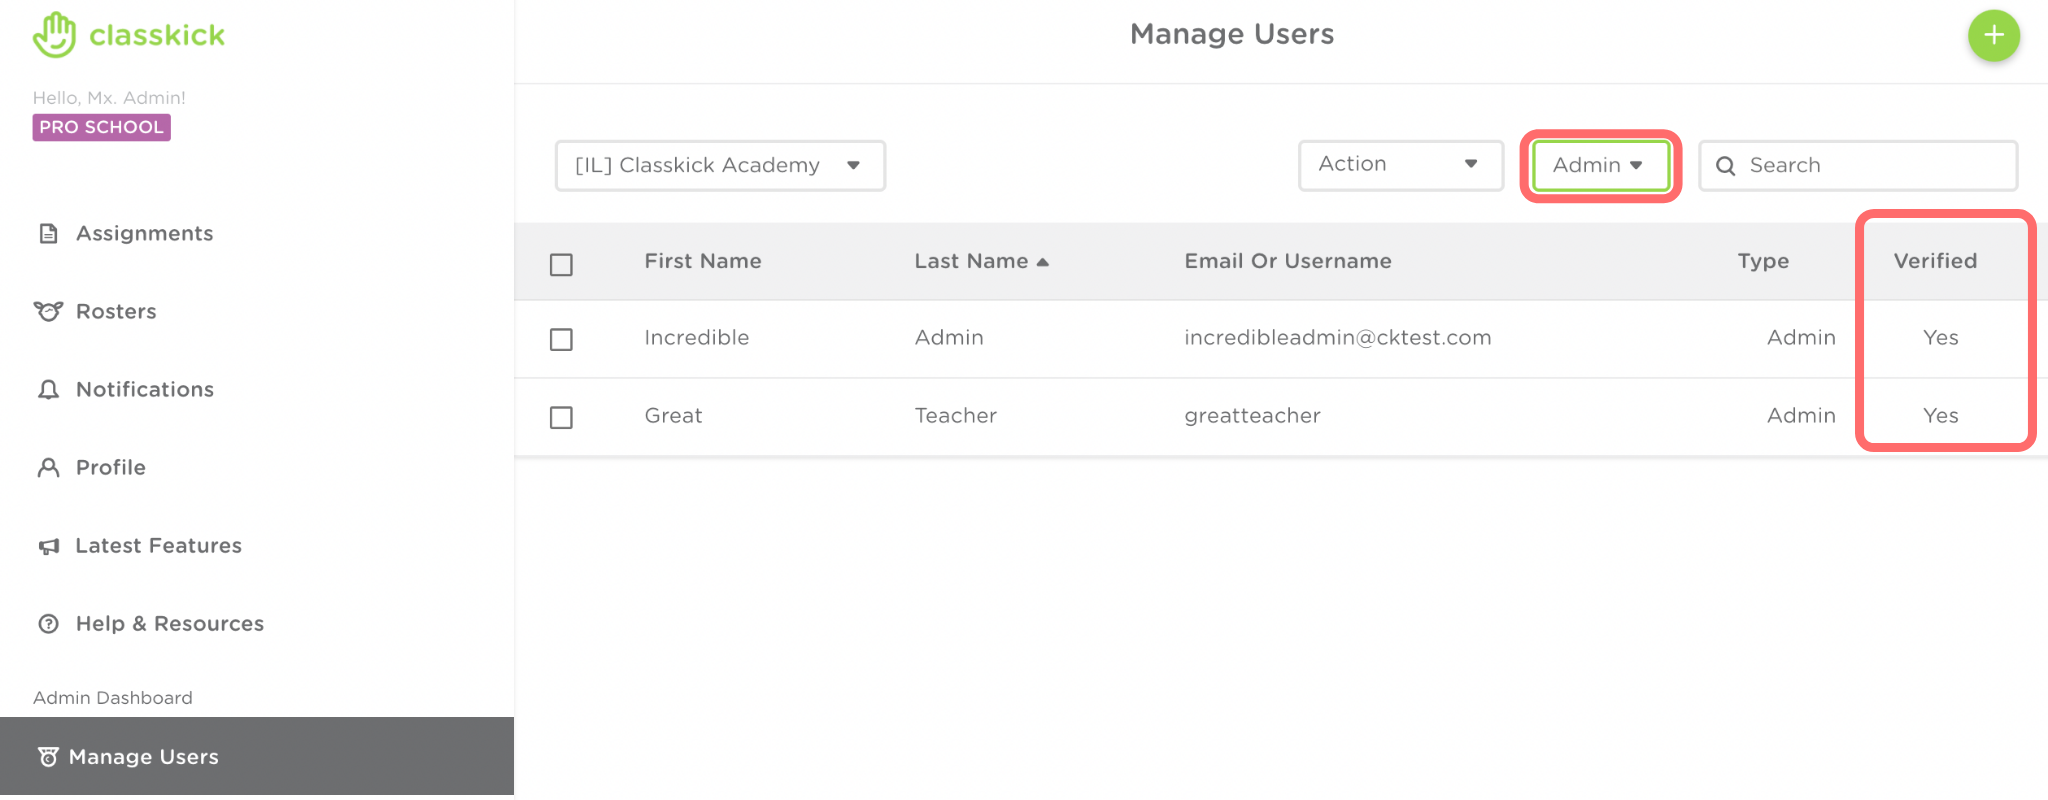 The Admin Dashboard is shown. The filter by role option is highlighted to show only Admin. The verified column is highlighted to show that admin are verified.